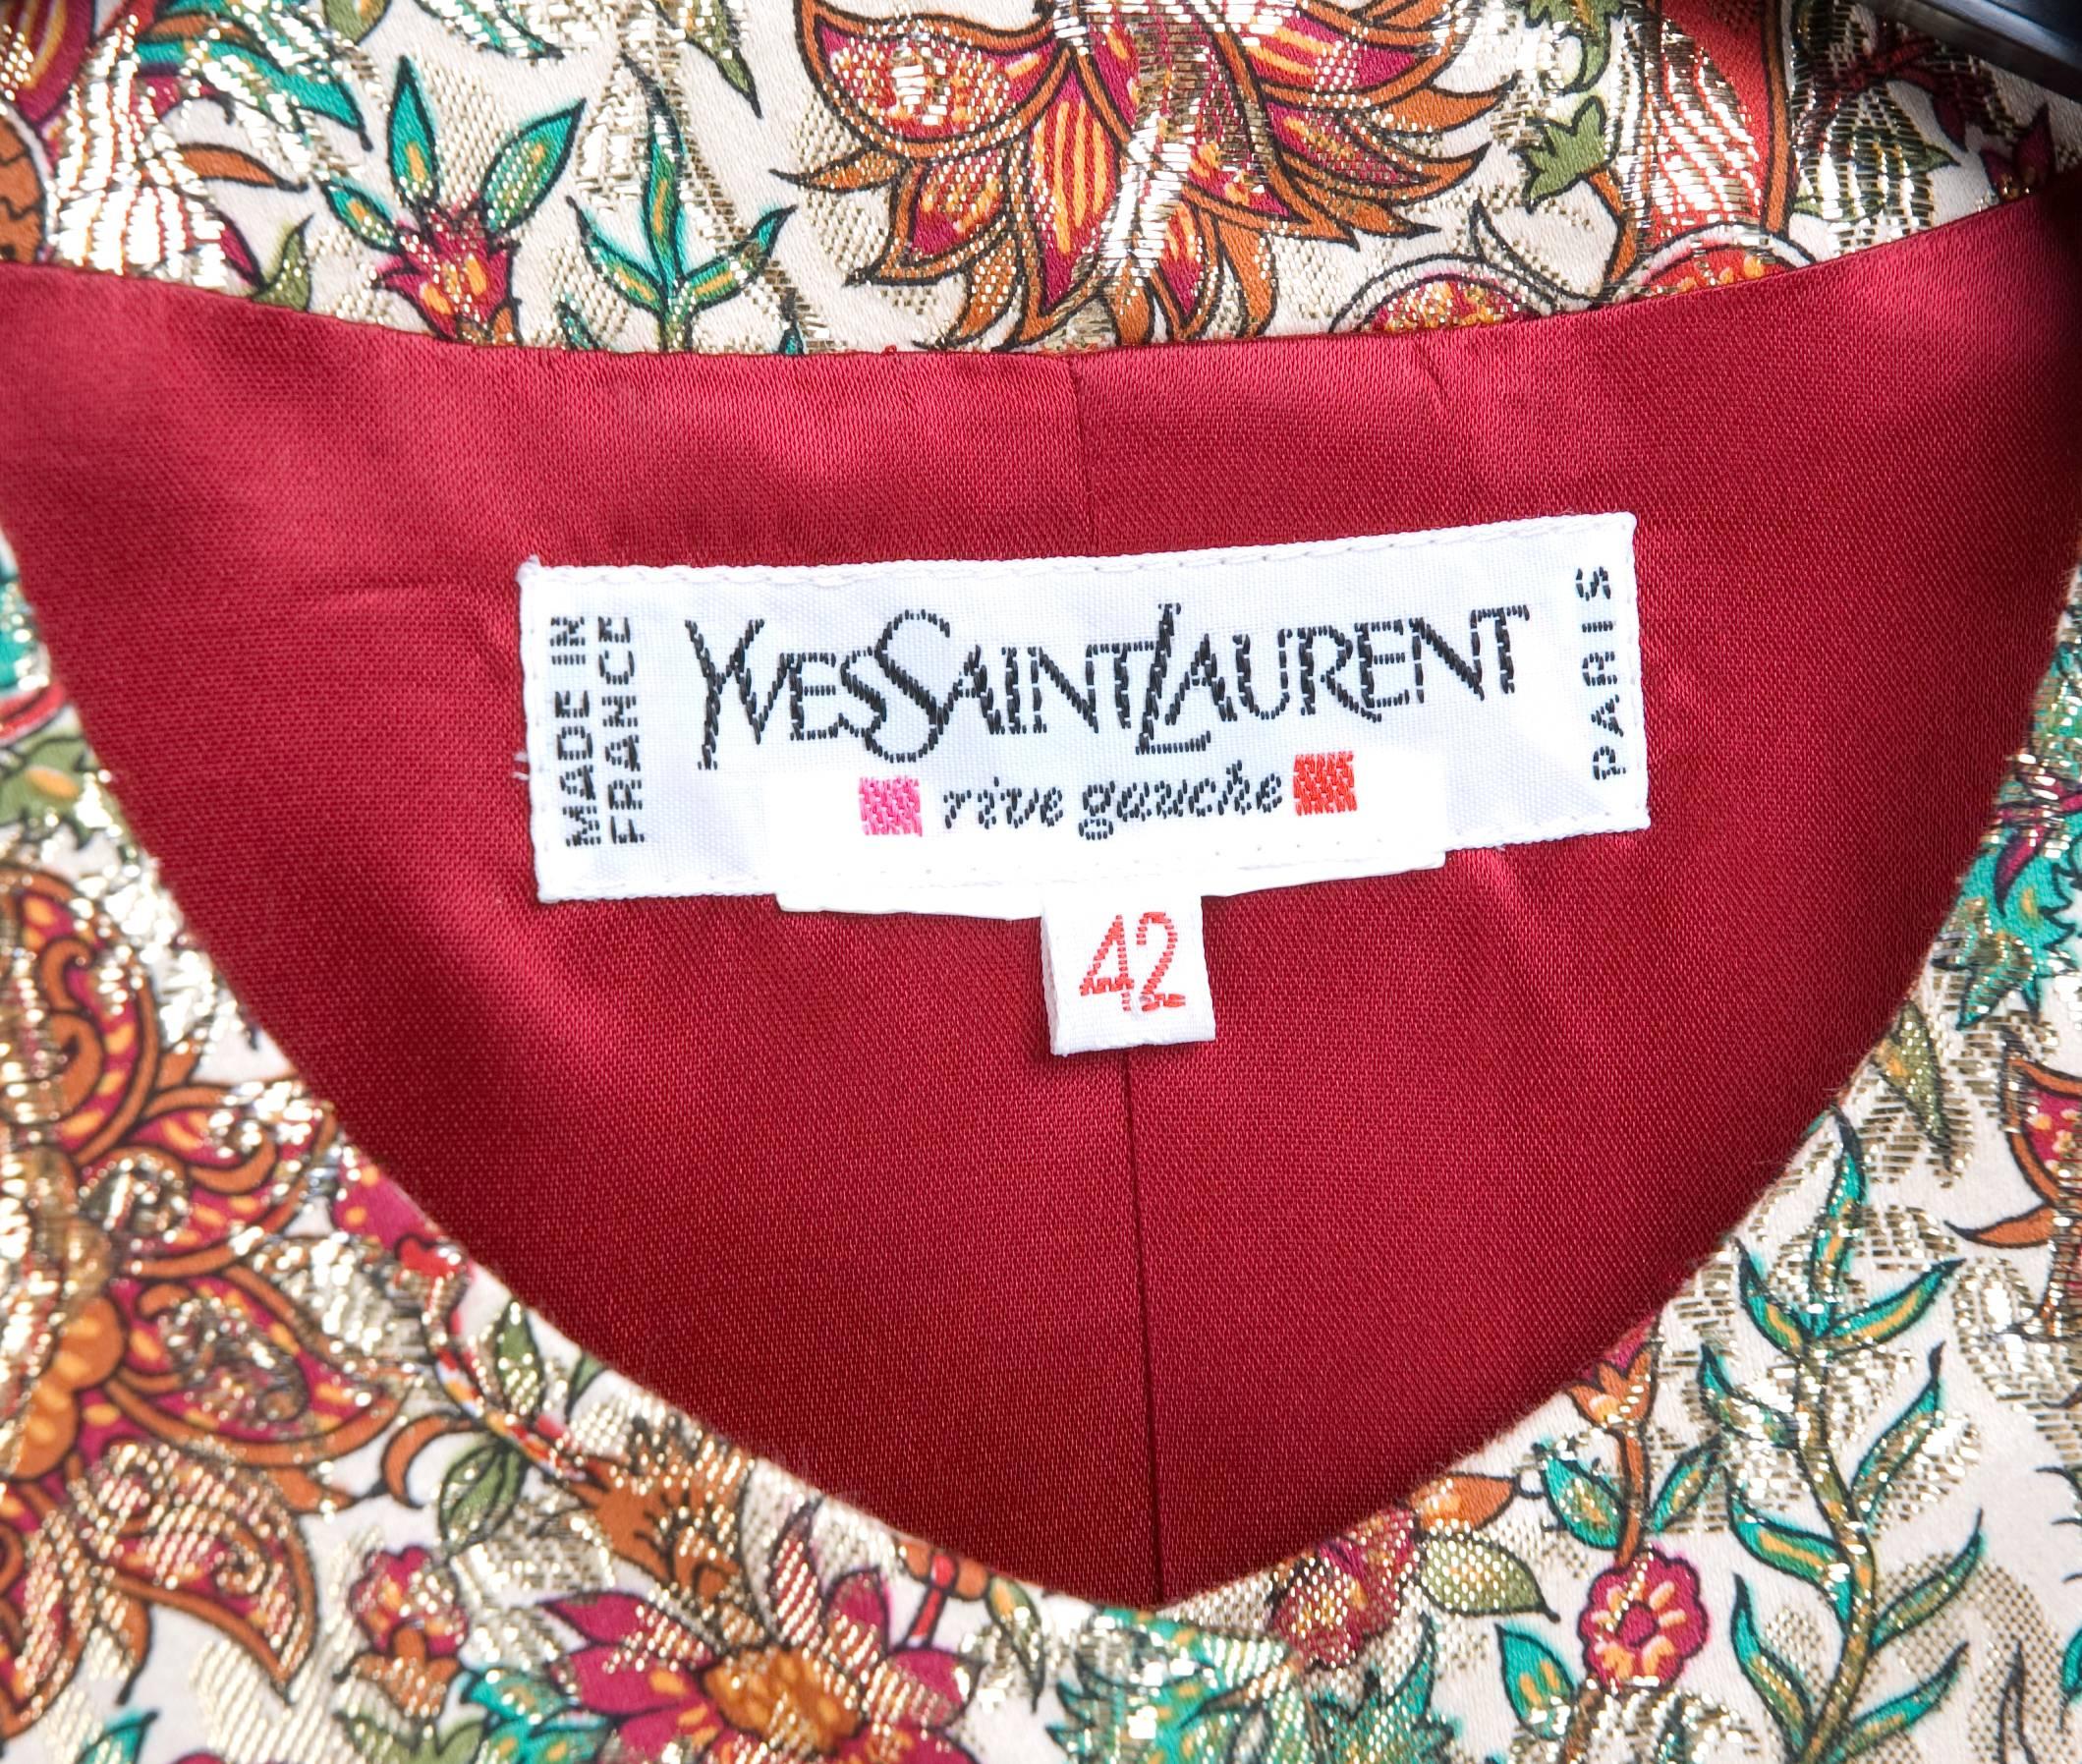 Vintage Yves Saint Laurent Brocade Suit in Gold, Red and Green For Sale 5